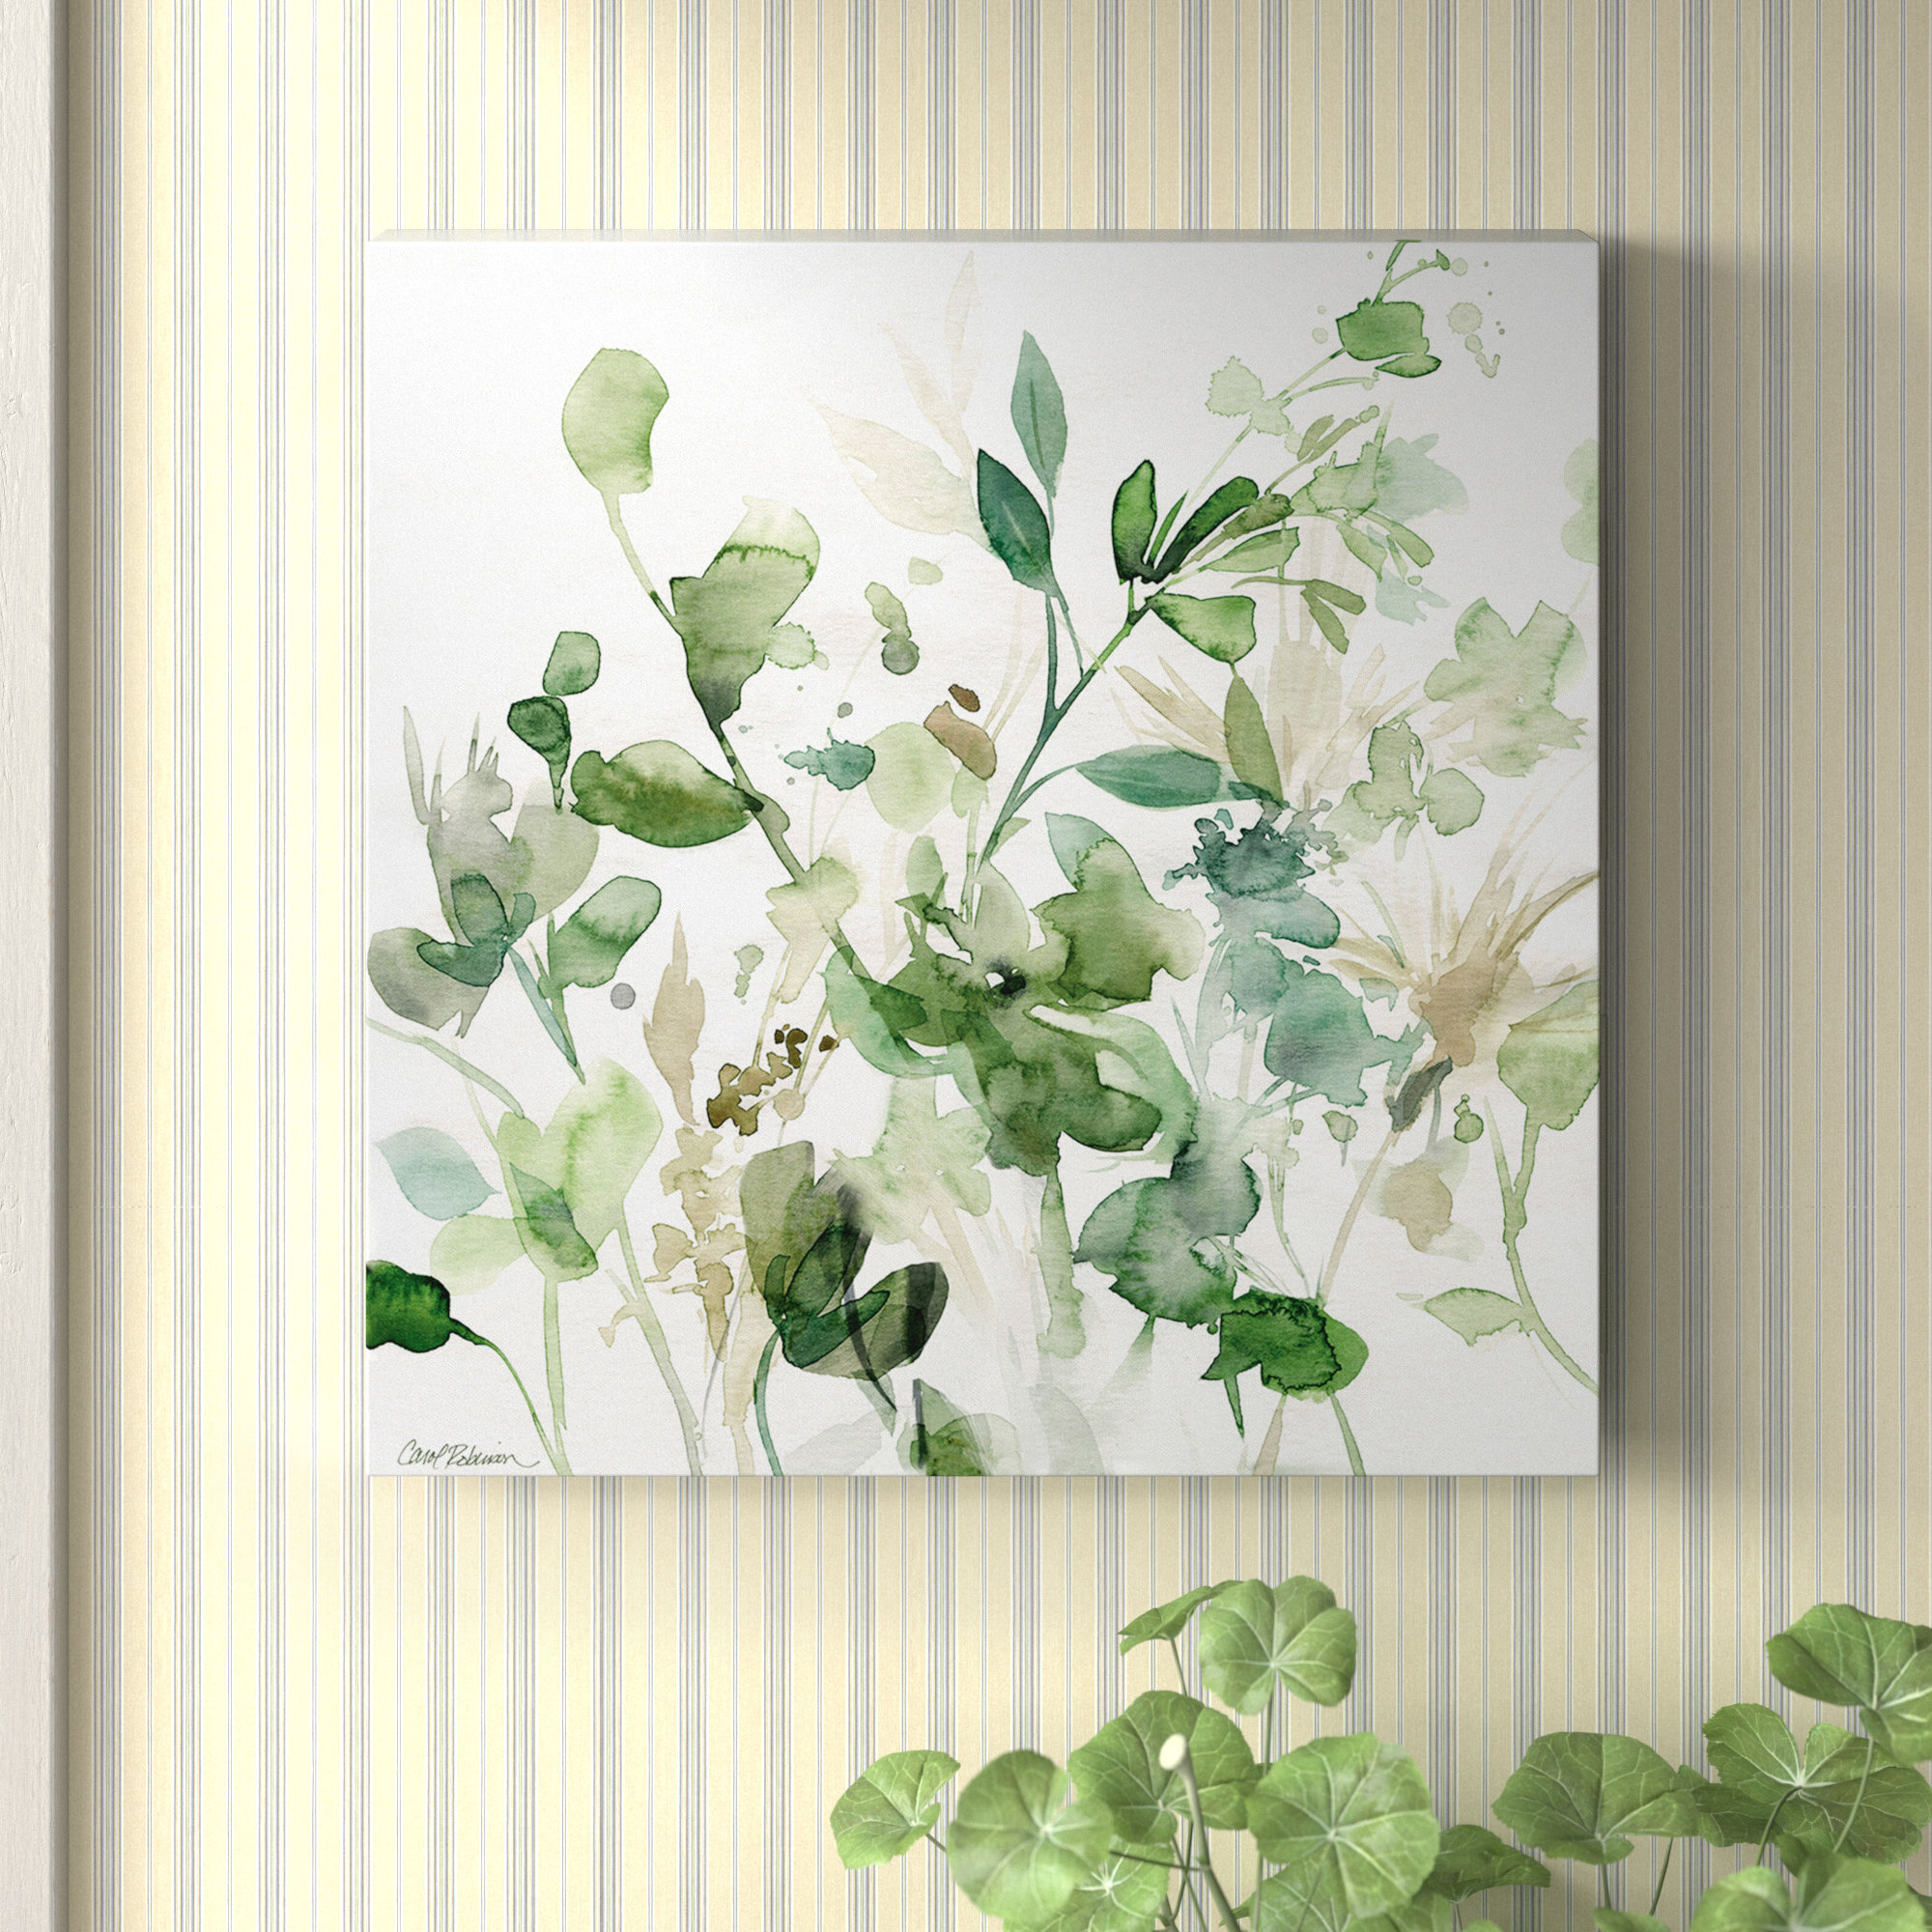 Live Simply Print-Live Simply-Leaf Wreath Print-Leaf Wreath-Garden Print-Leaf Print-Botanical Print-Leaves-Printable Art-Instant Download